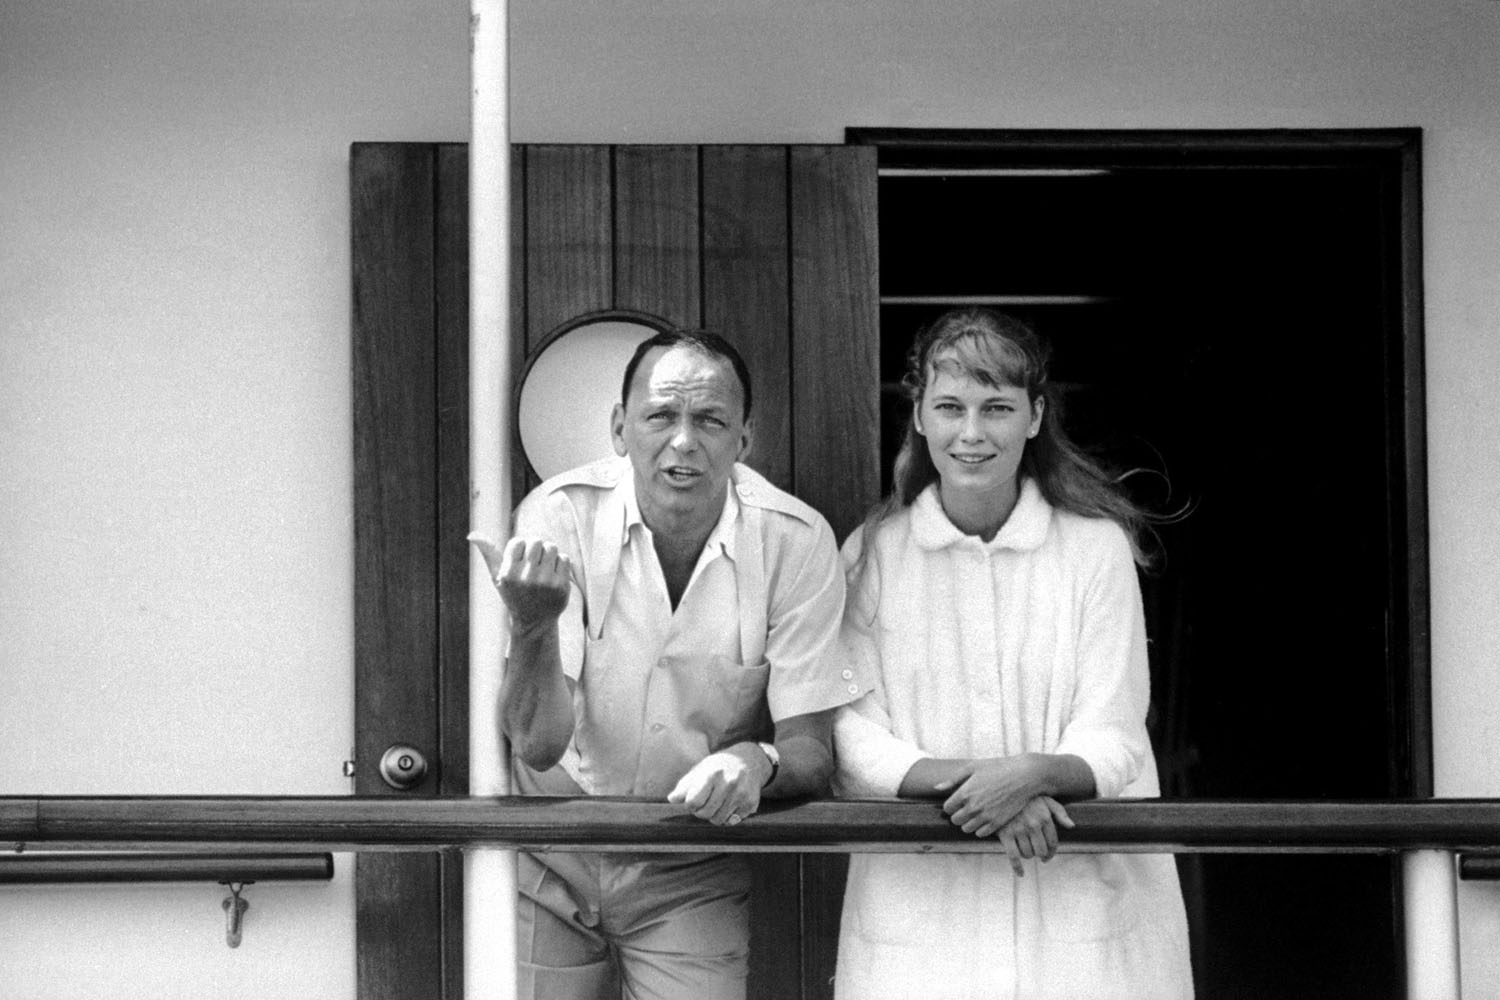 Singer Frank Sinatra with actress girlfriend Mia Farrow on deck of the yacht Southern Breeze.